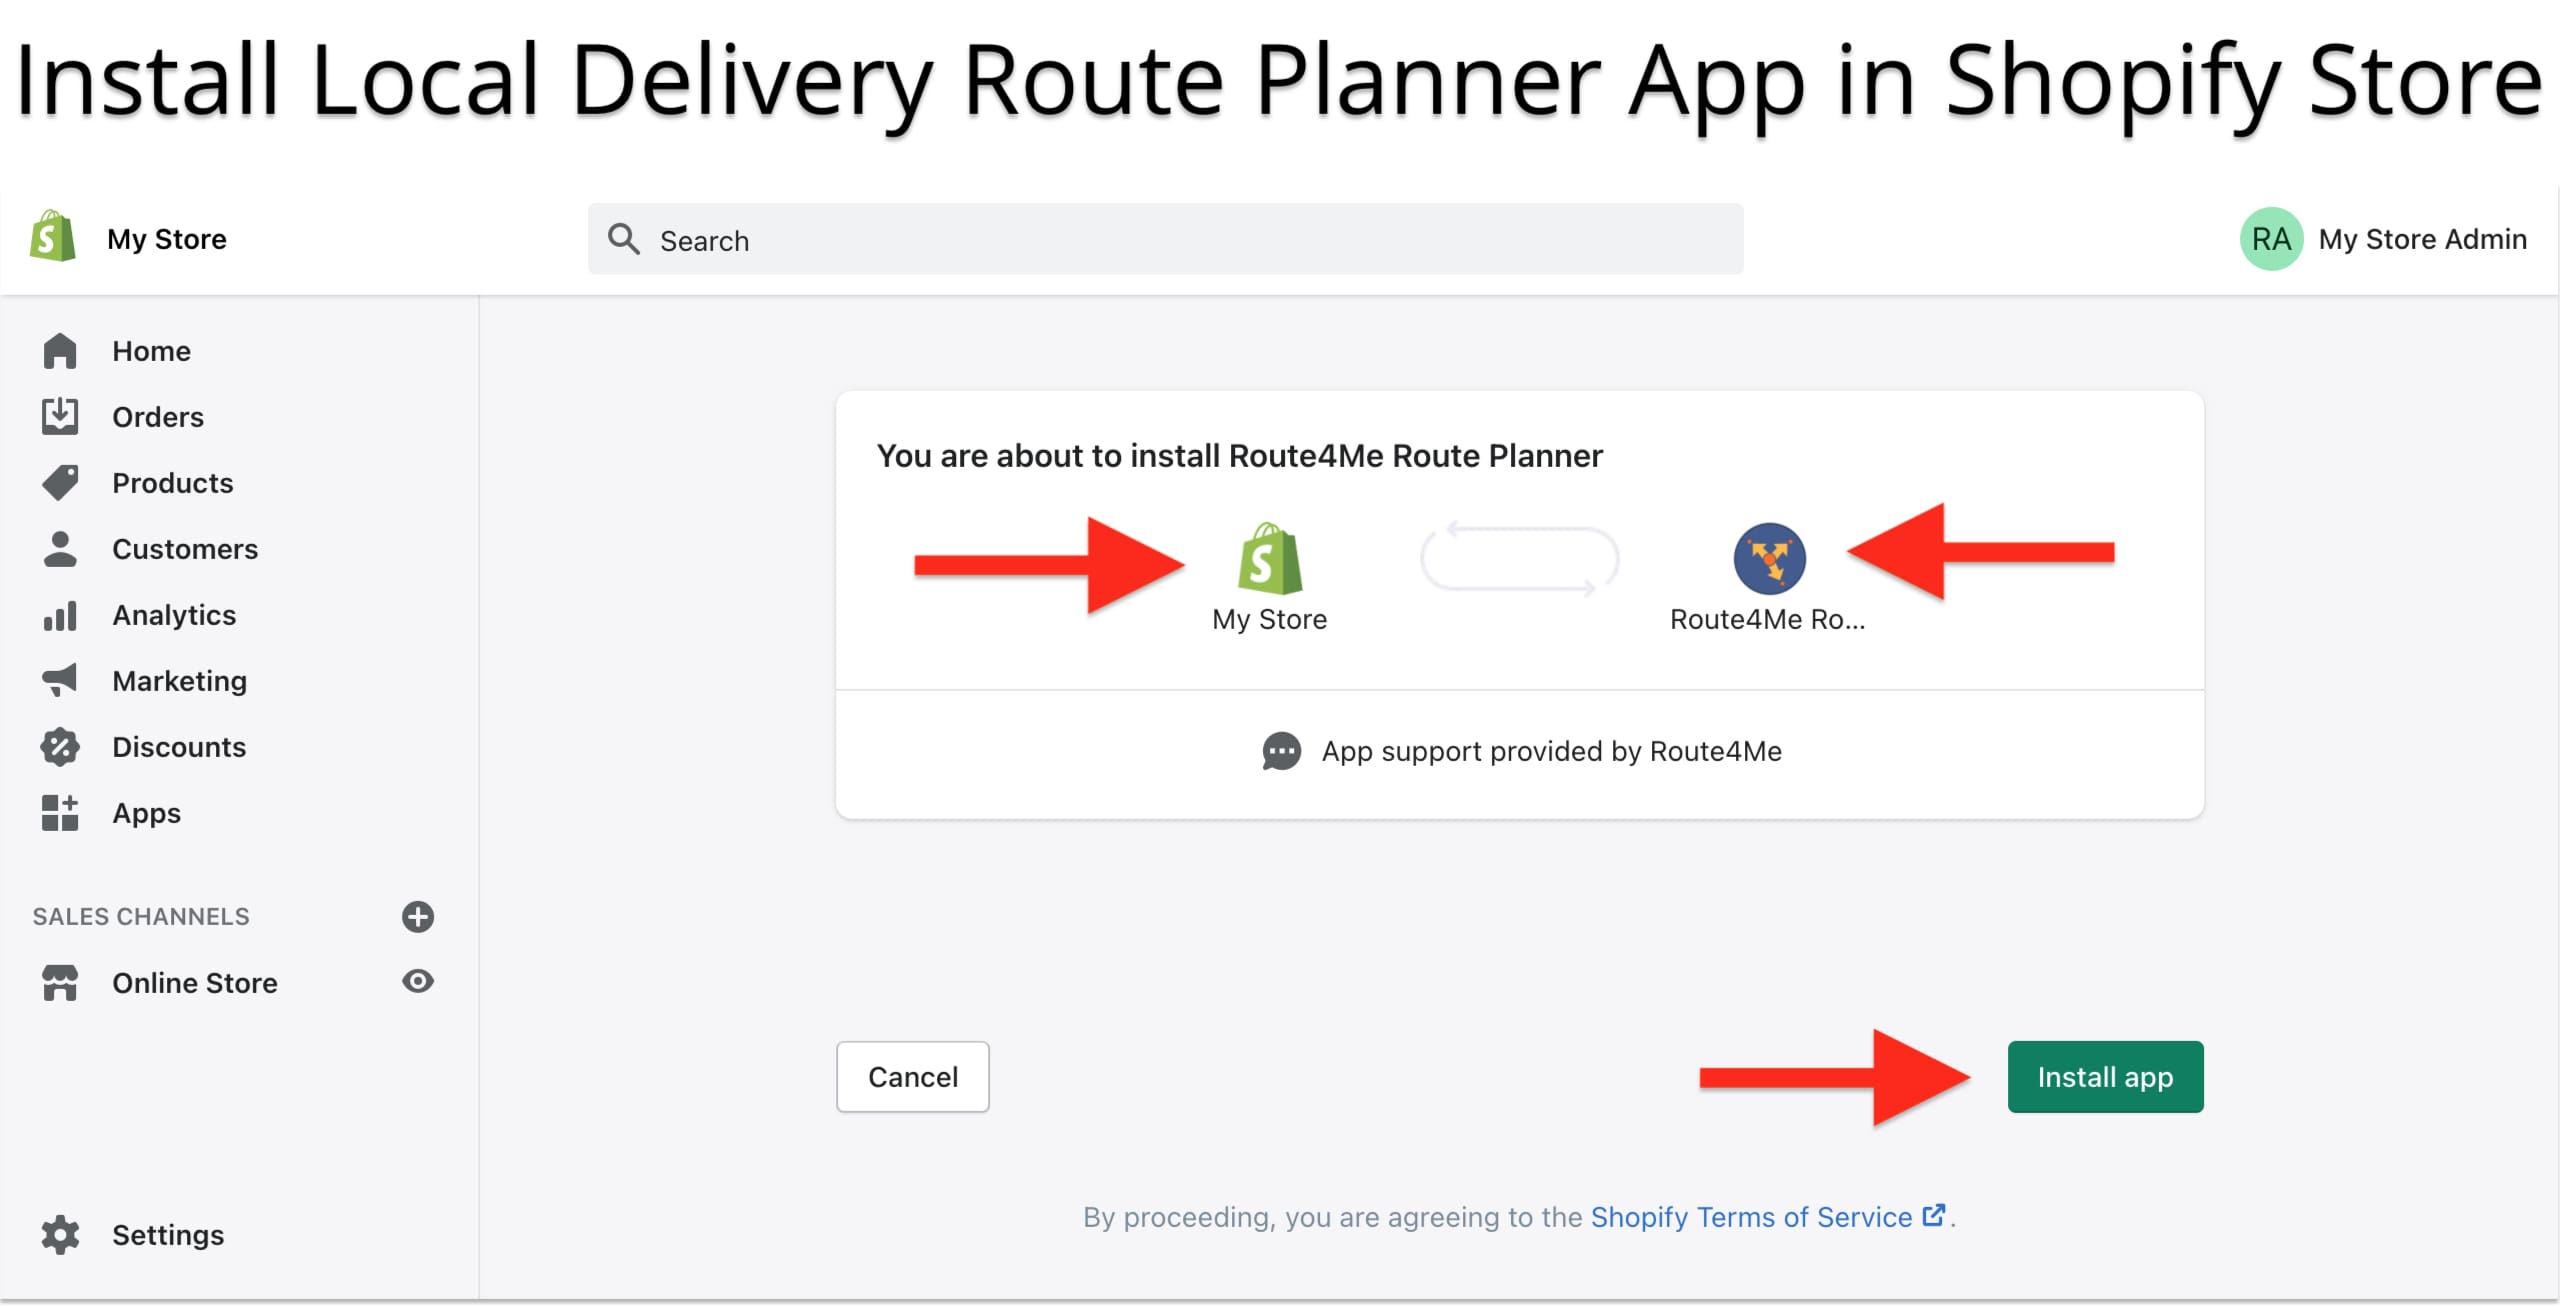 Install the local delivery route planner app in your Shopify store to send orders for drop-off.